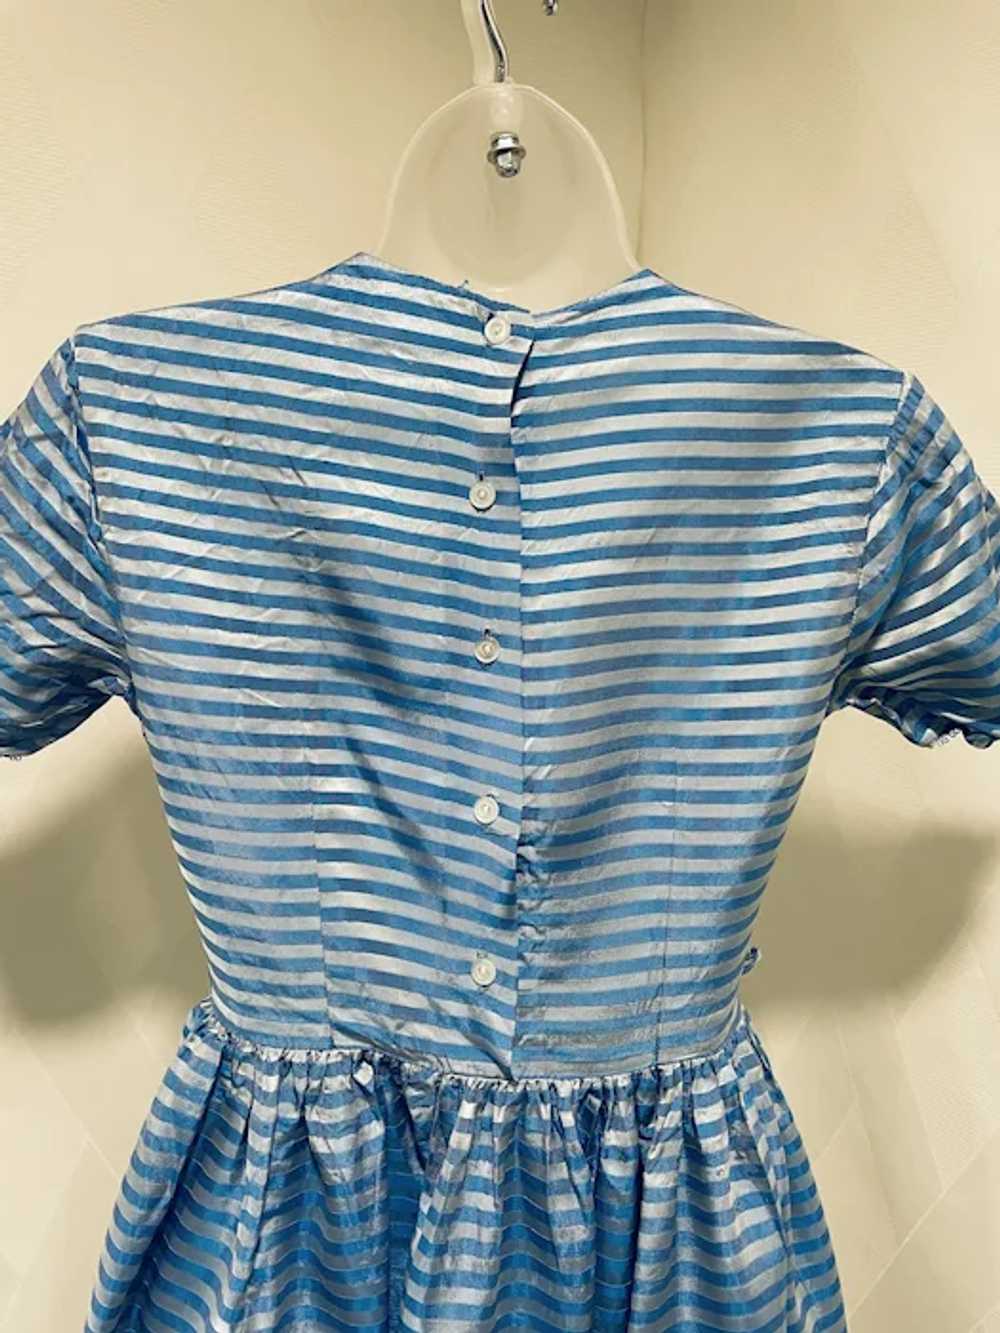 Vintage 1950s Blue and Silver Striped Dress - image 7